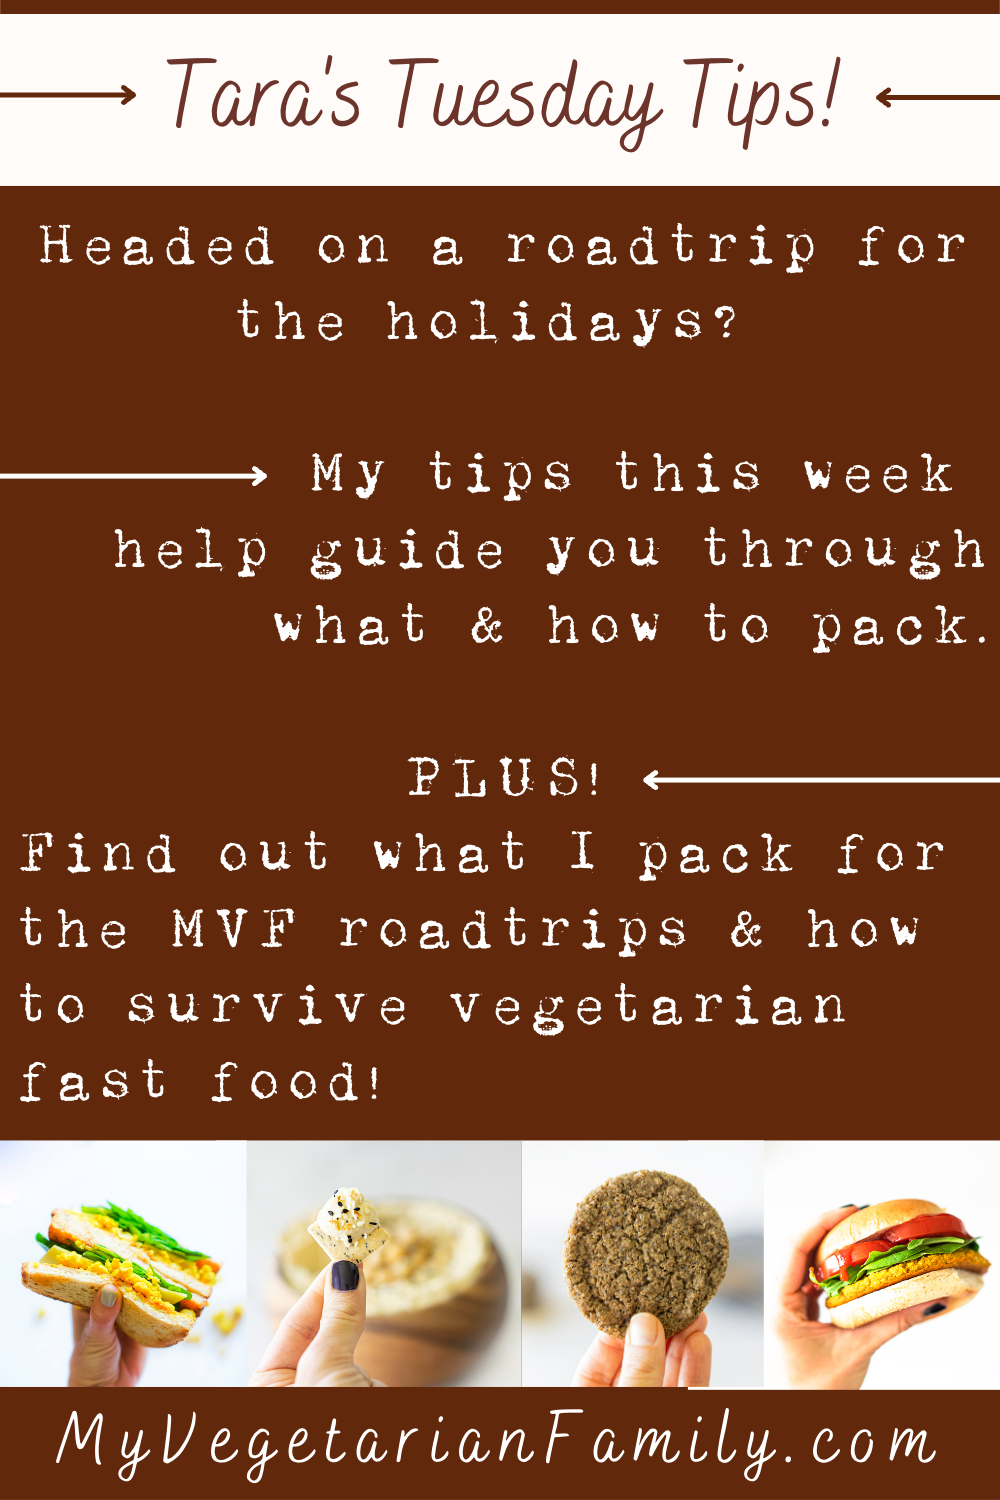 How To Pack For a Raodtrip as a Vegetarian | My Vegetarian Family | Tara's Tuesday Tips #vegetariantips #vegaroadtrip #vegetarianroadtripfood